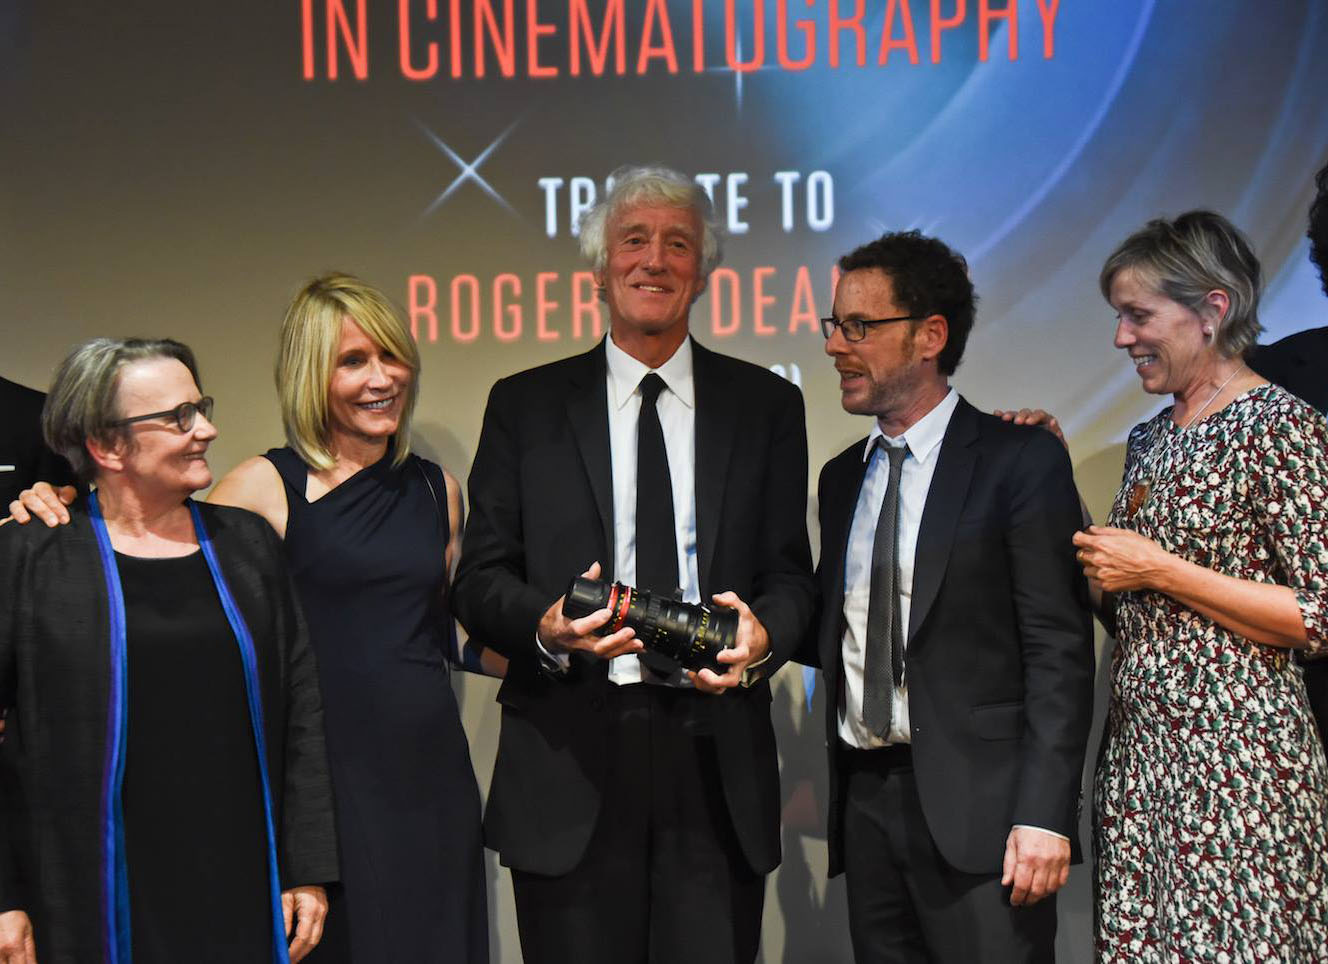 Posing at the ceremony honoring Roger Deakins, ASC, BSC, are (from left): director Agnieszka Holland, James and Roger Deakins, director Ethan Coen and actor Frances McDormand. (Credit: Angenieux/Pauline Maillet)